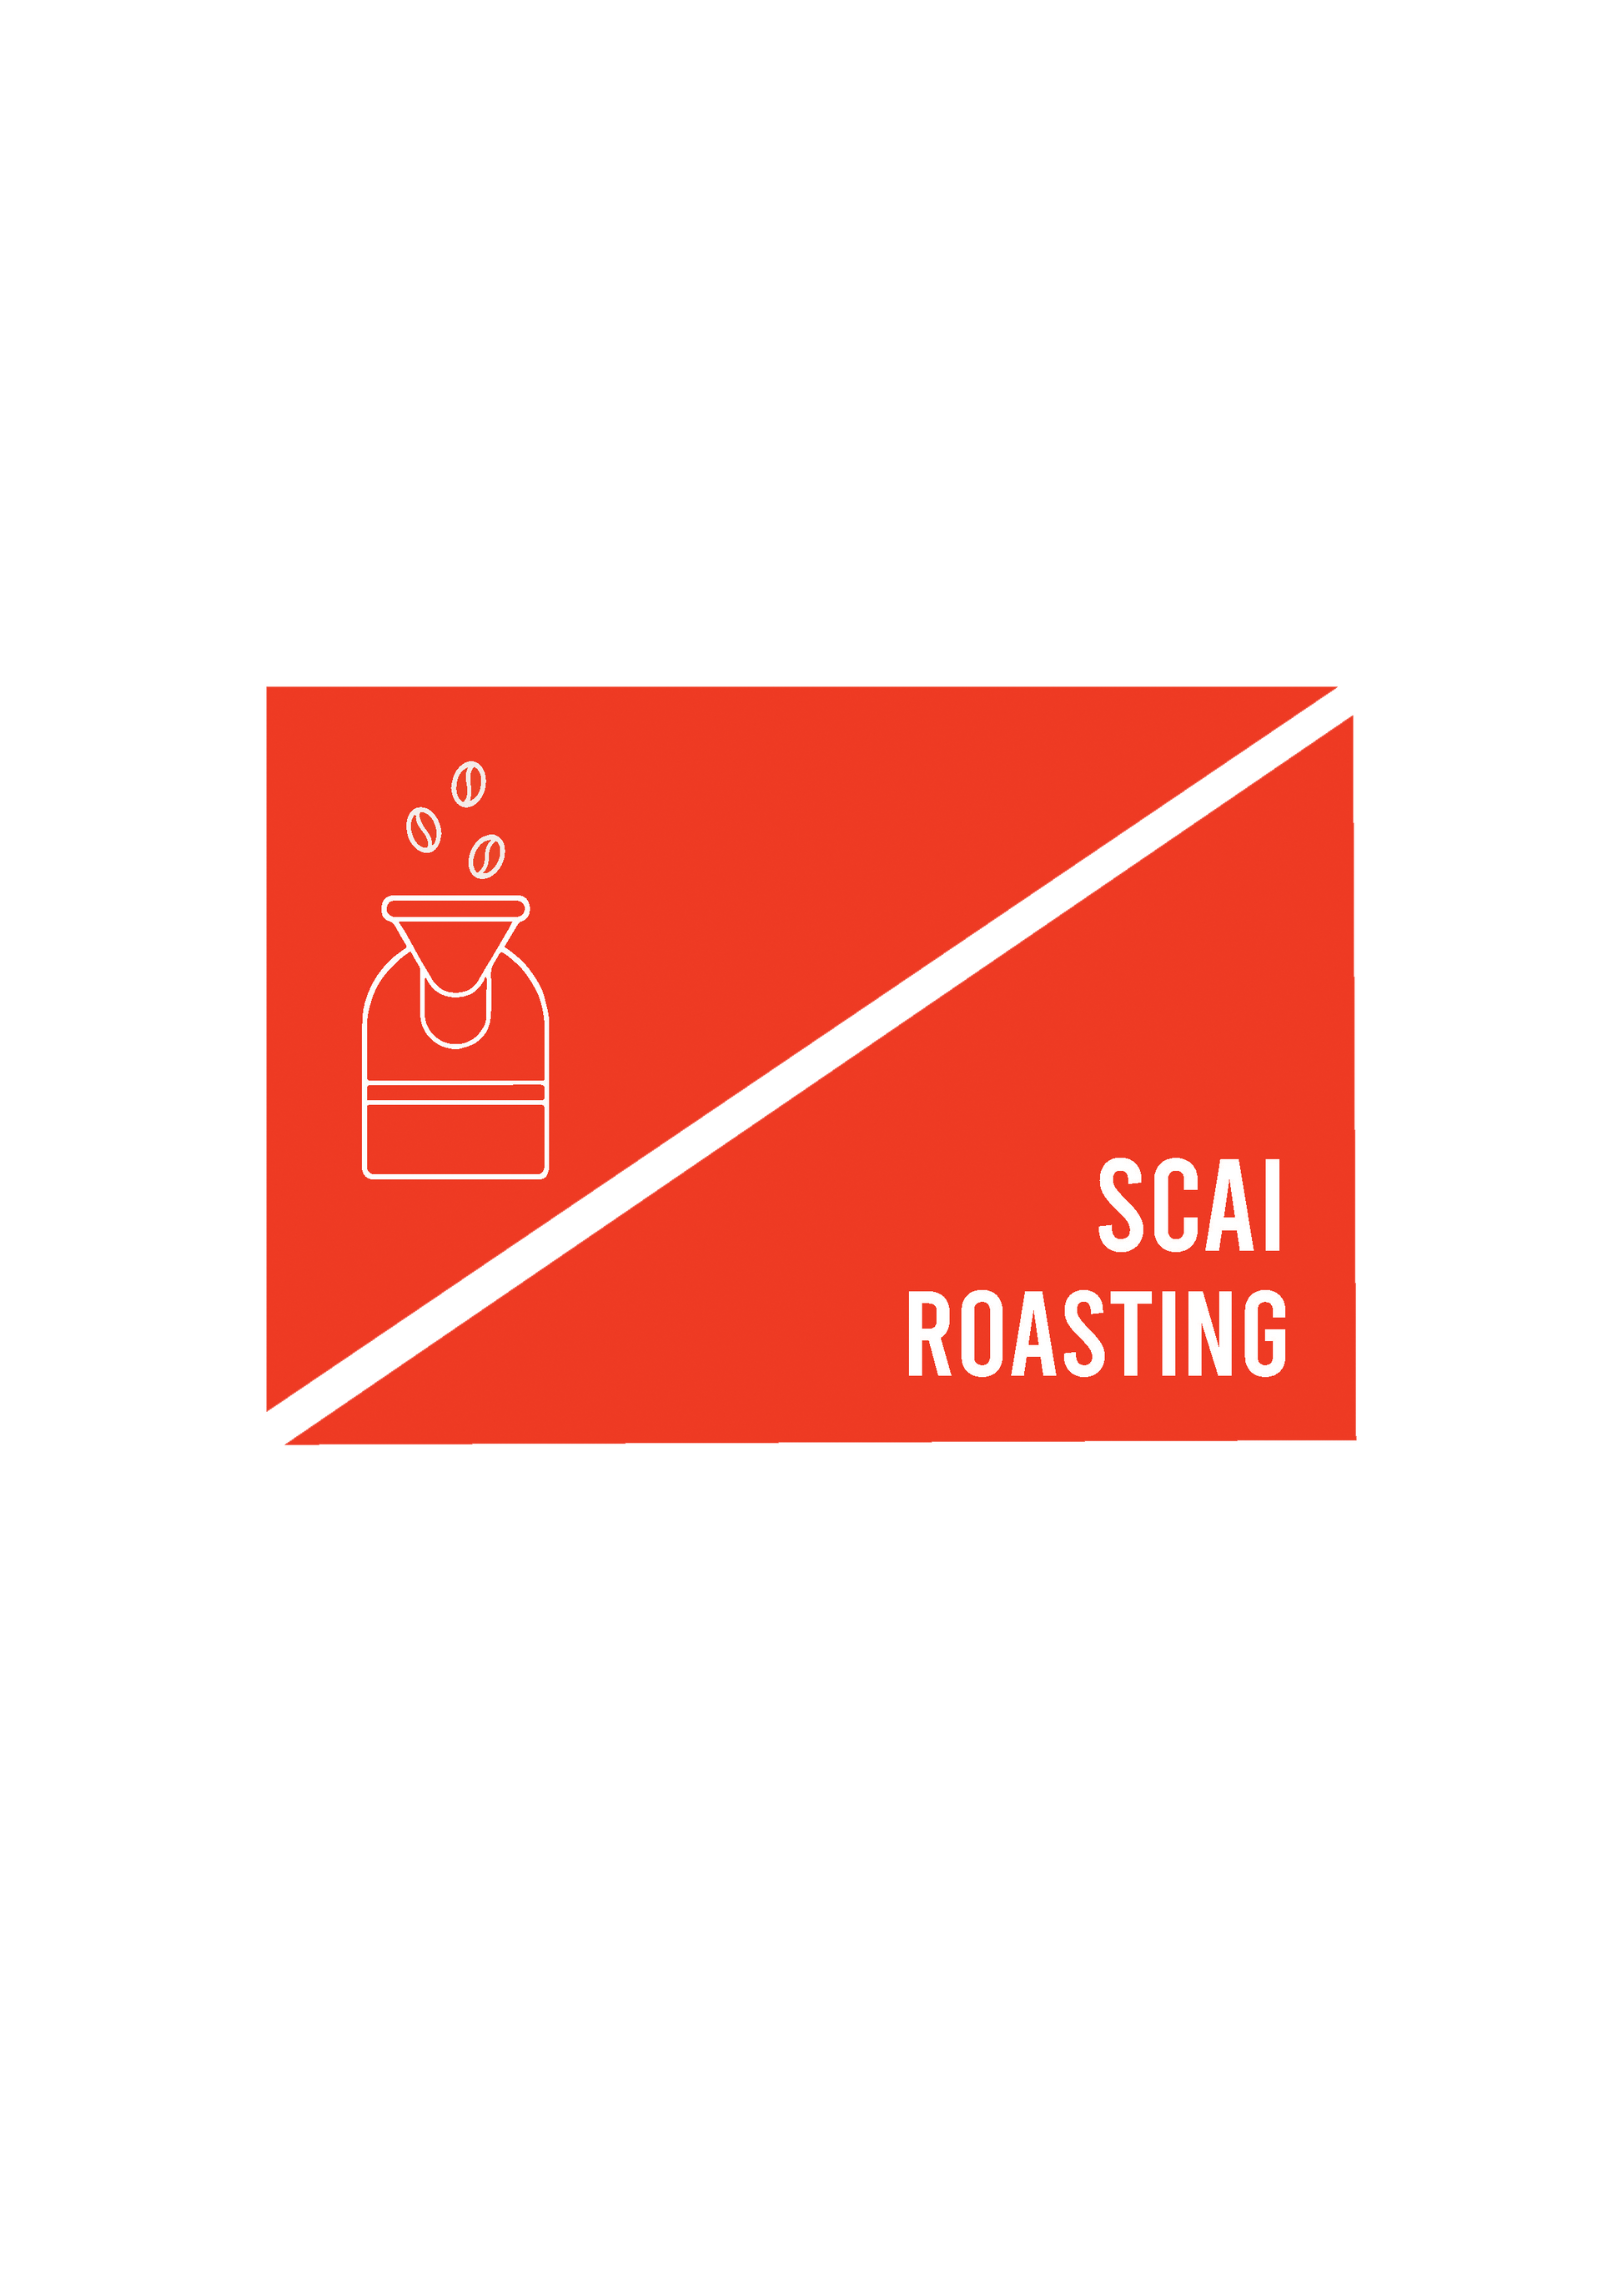 Roasting workshop conducted by SCAI to address coffee roasitng101